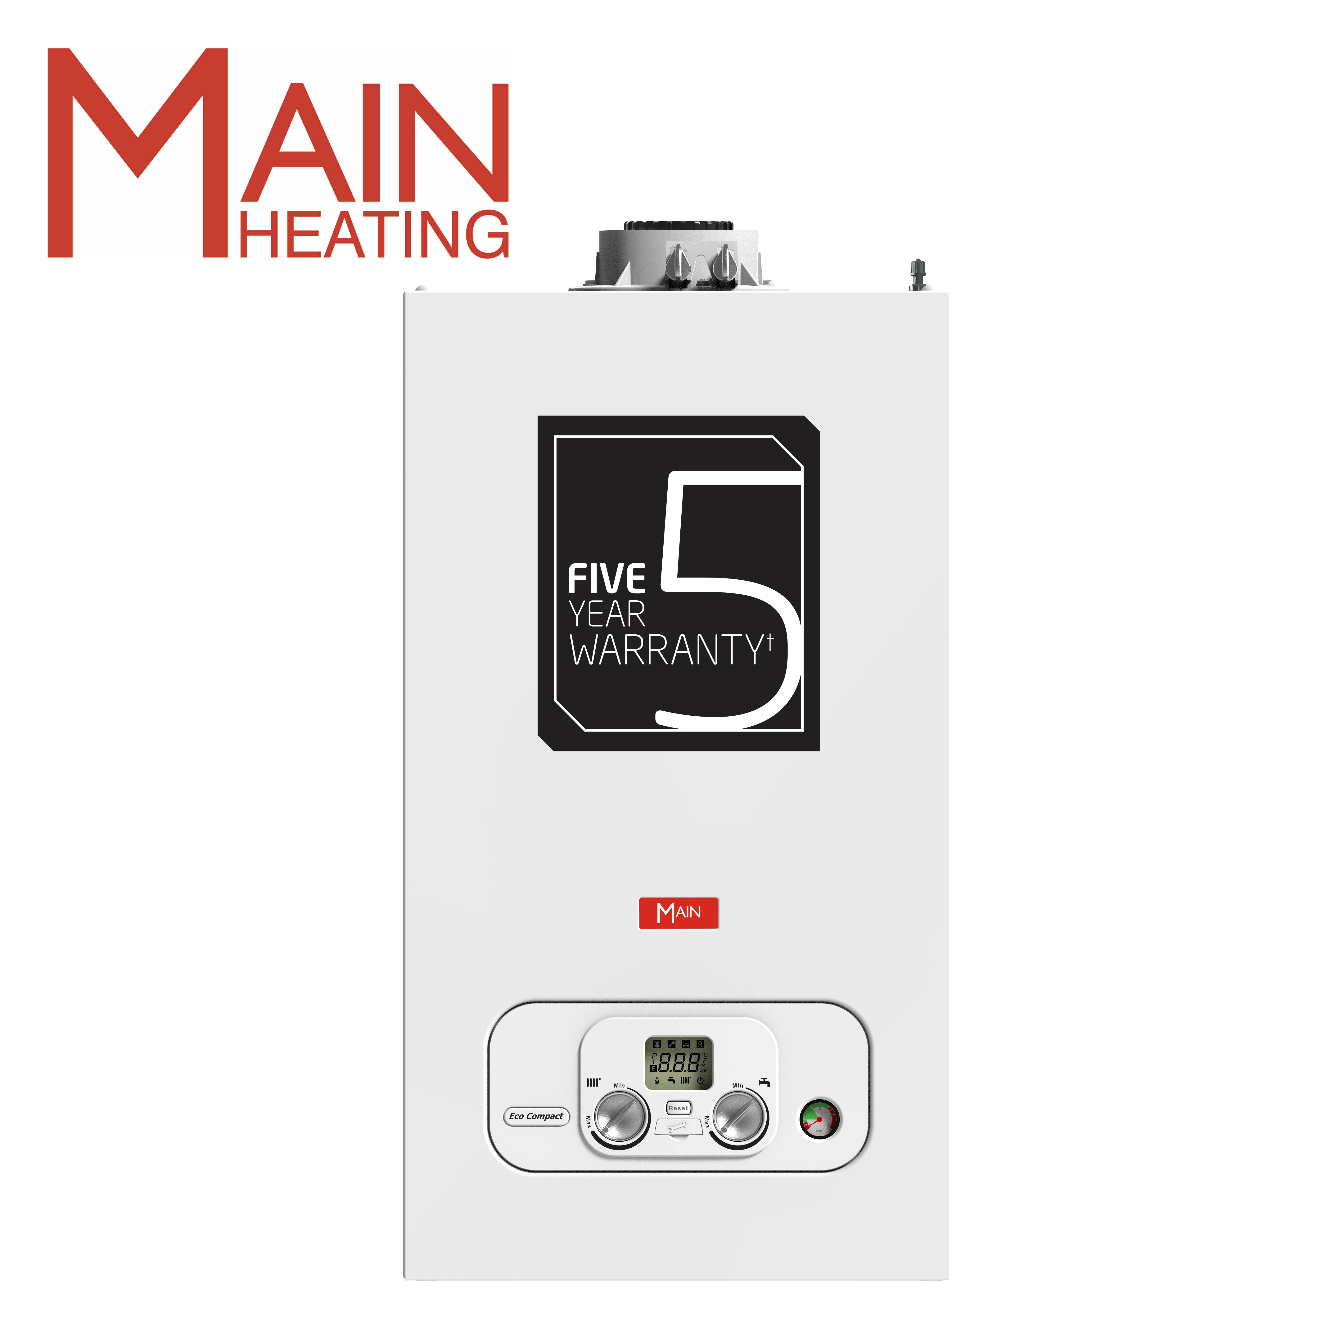 SPECIAL OFFER MAIN ECO COMPACT COMBI BOILER